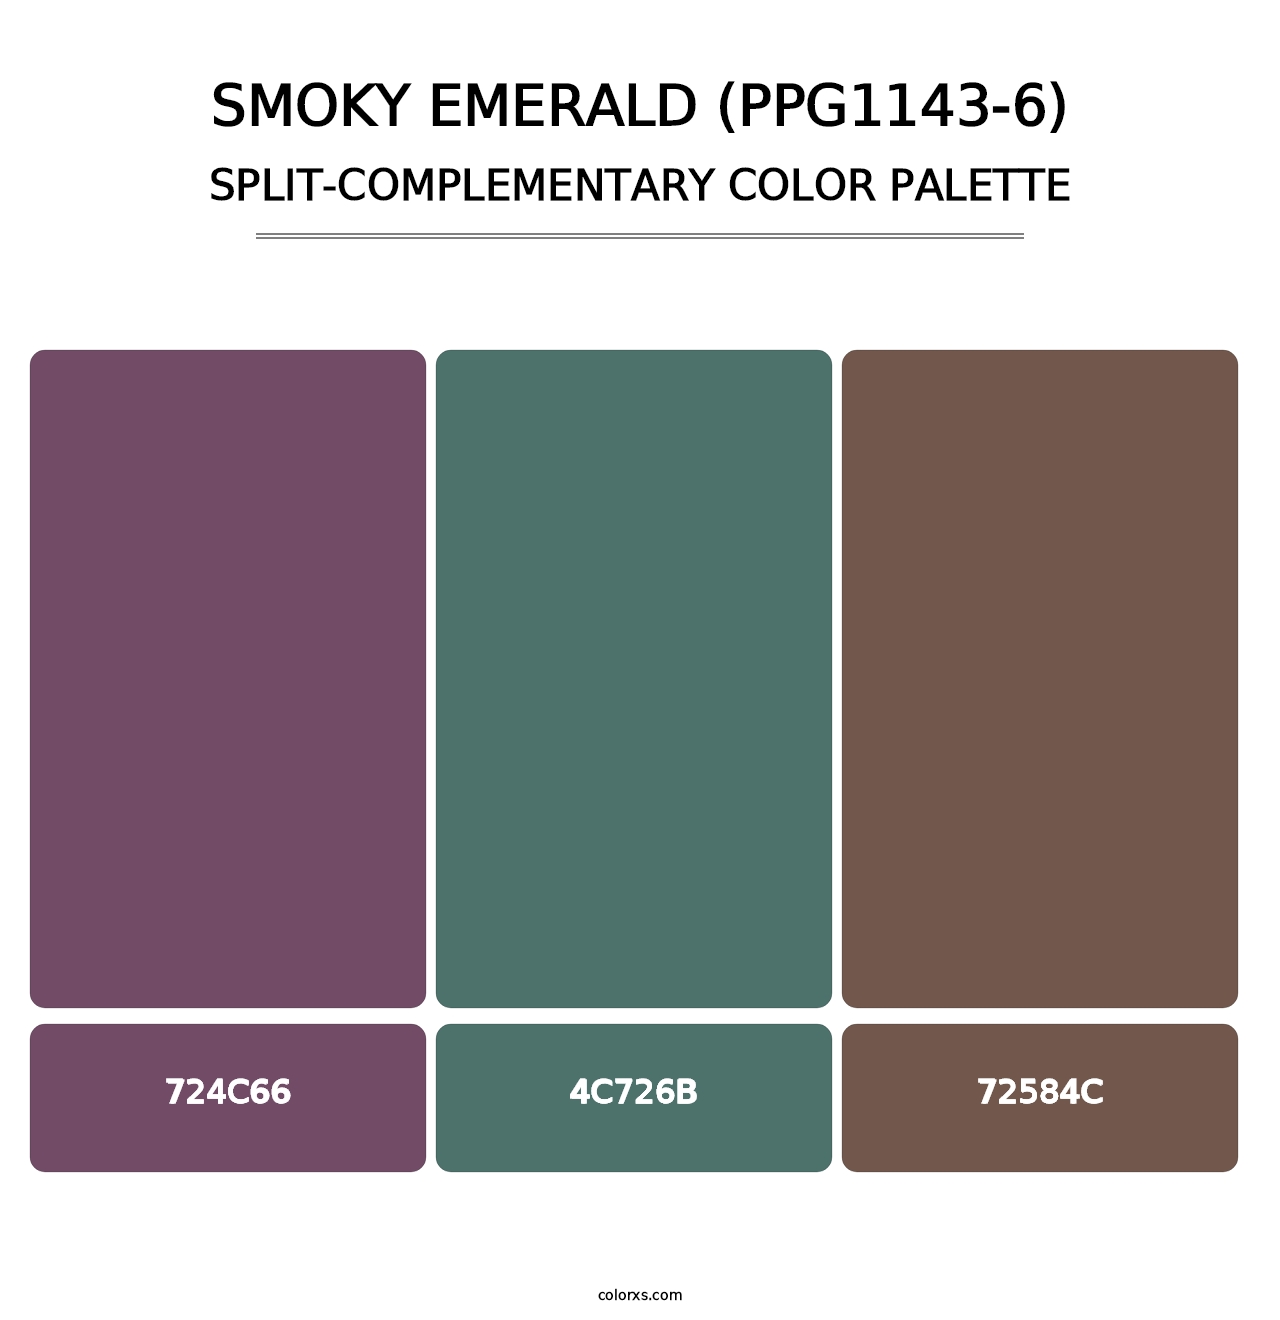 Smoky Emerald (PPG1143-6) - Split-Complementary Color Palette